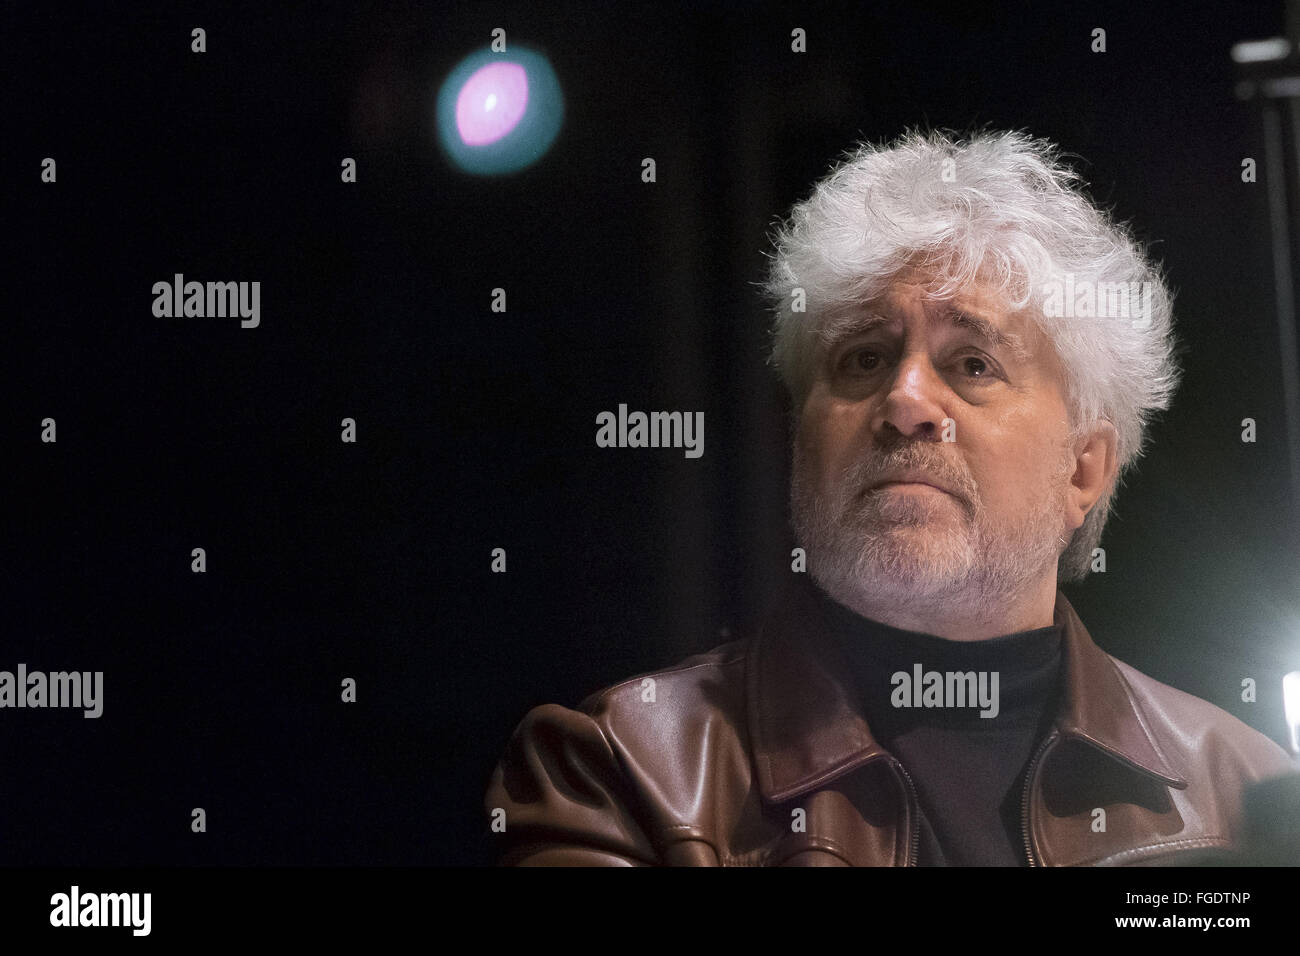 Spanish film maker Pedro Almodovar gives a master class during the Profesional Artistic School held at Fine Arts building in Madrid  Featuring: Pedro Almodovar Where: Madrid, Spain When: 13 Jan 2016 Stock Photo